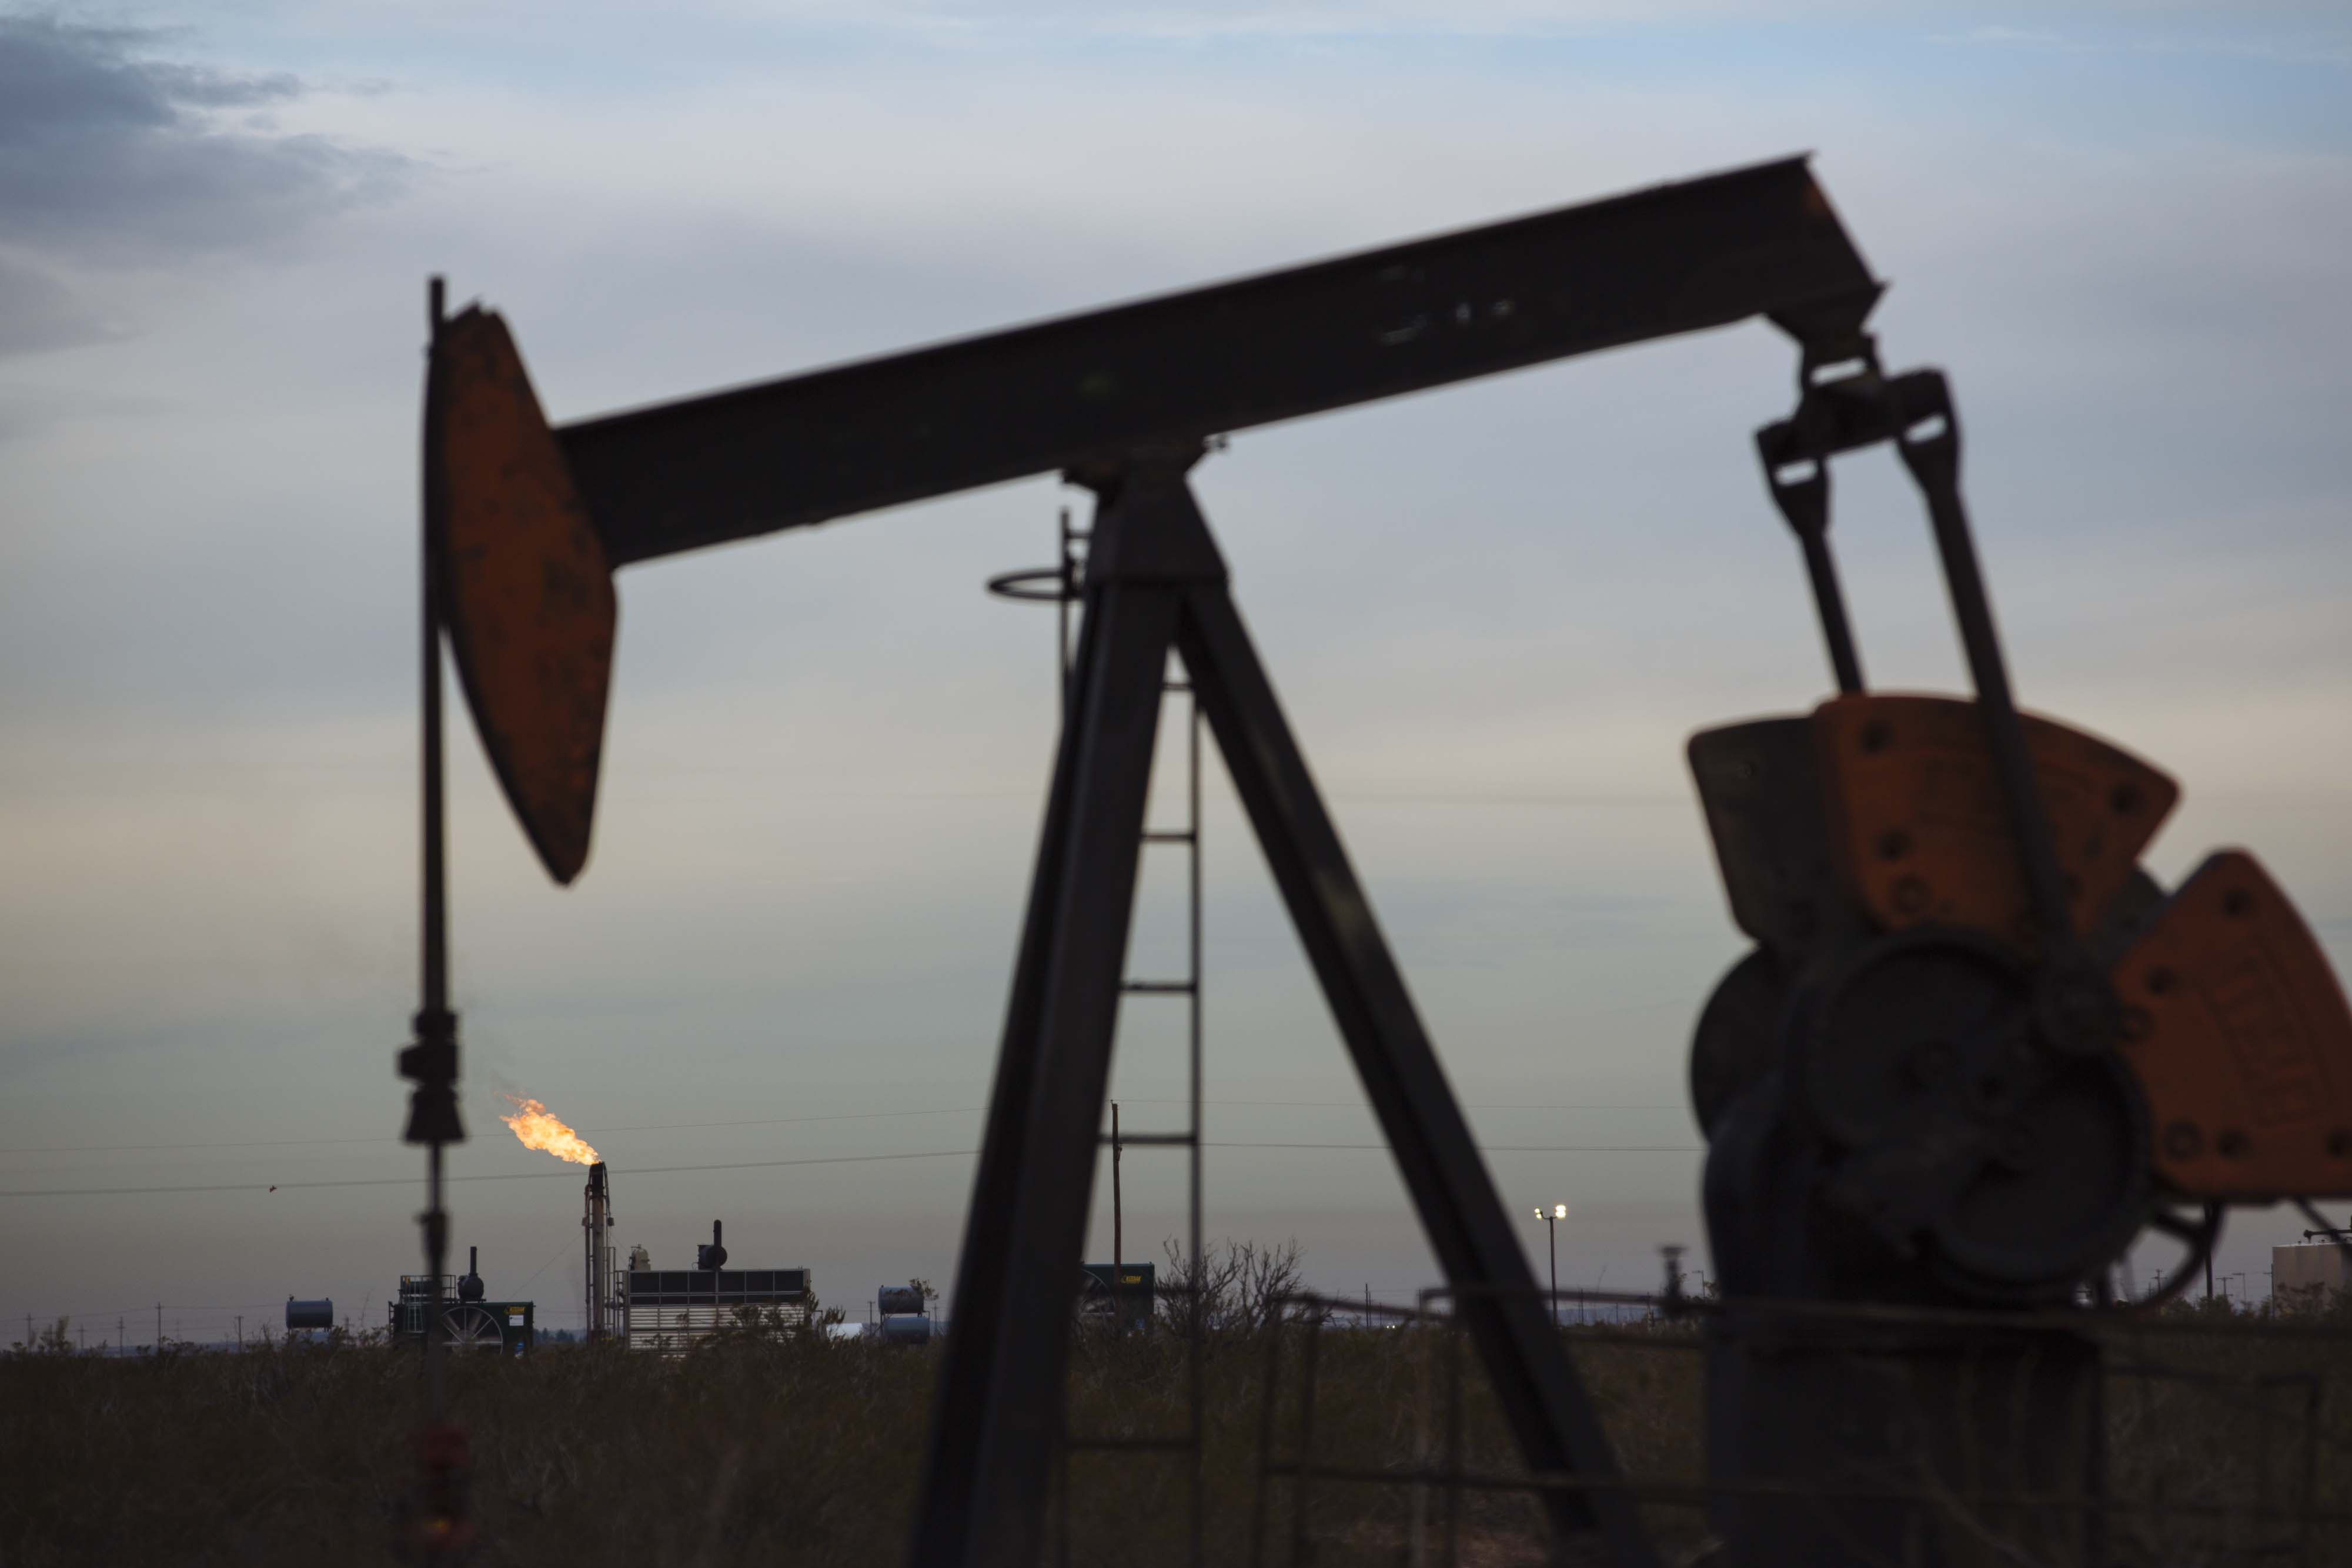 The Permian Basin is getting gassier as wells age and oil output declines